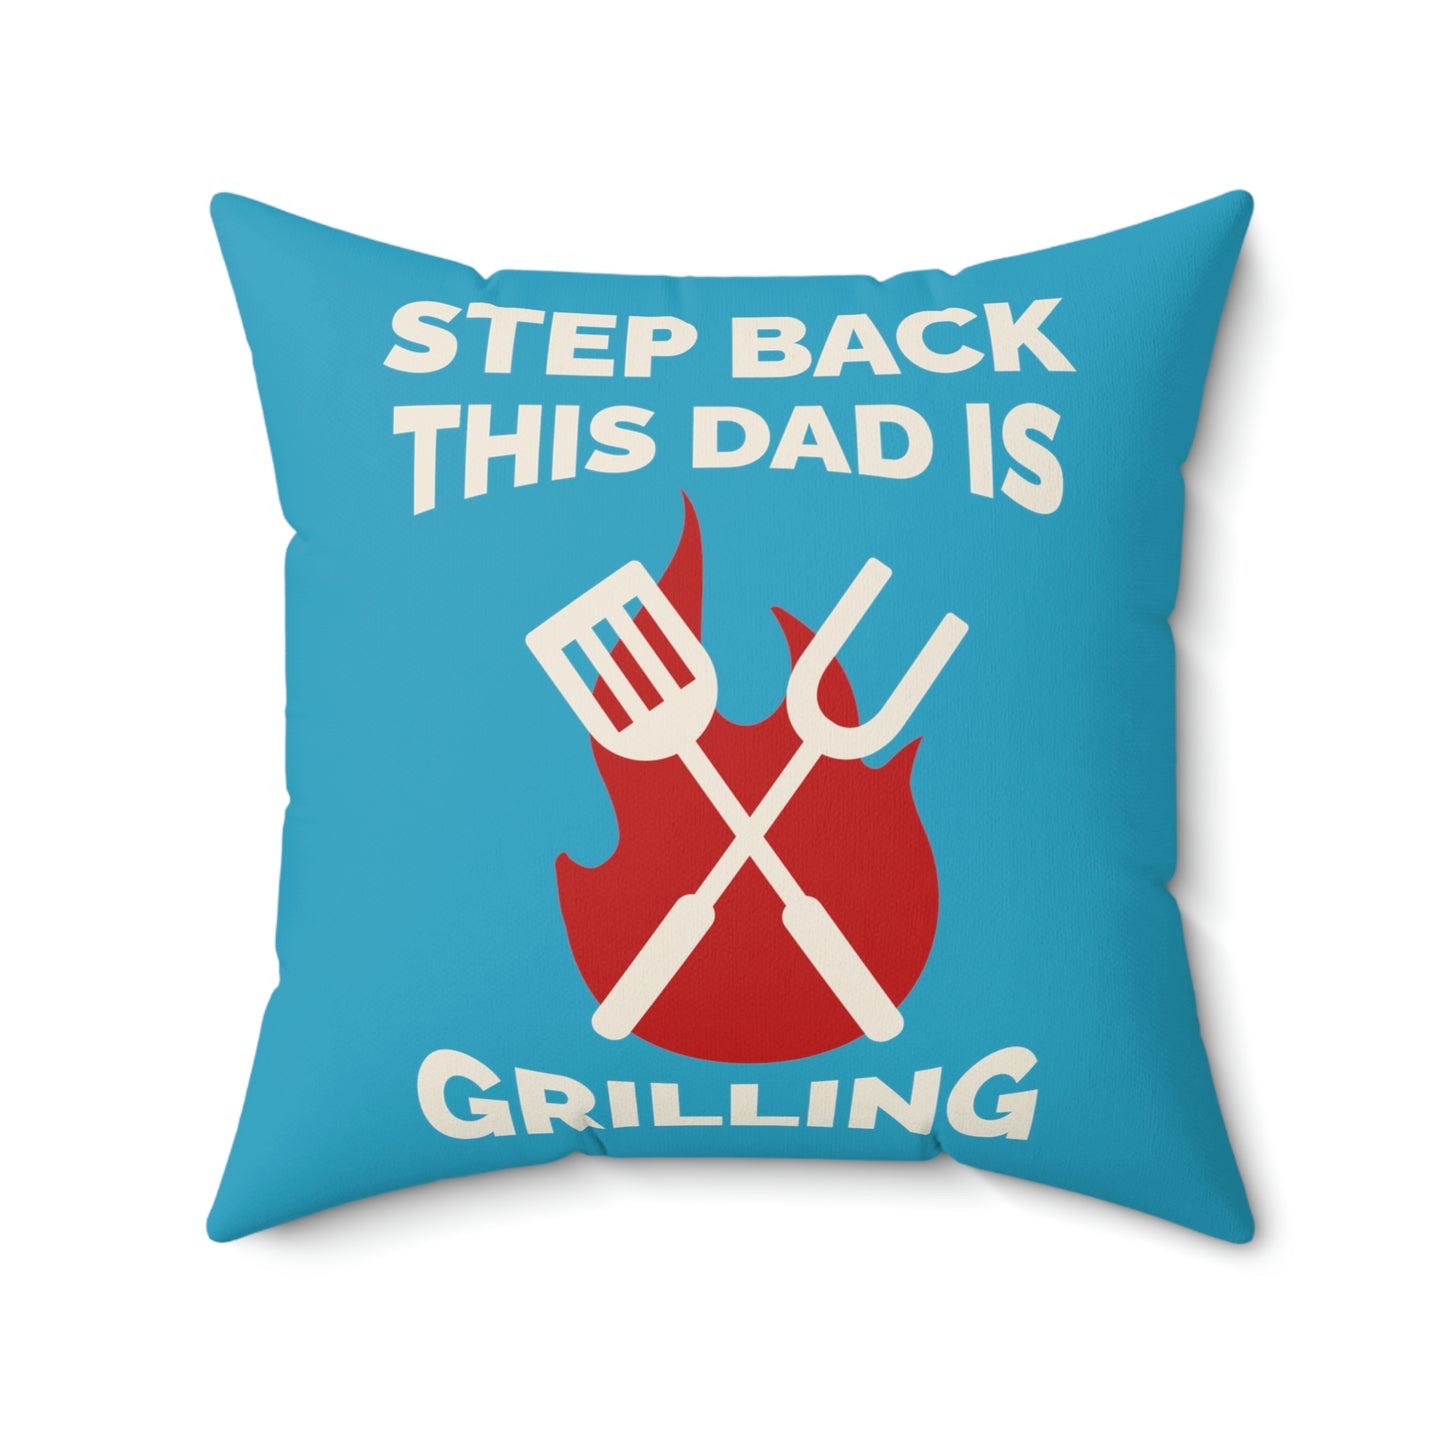 Spun Polyester Square Pillow Case "Step Back This Dad Is Grilling on Turquoise”